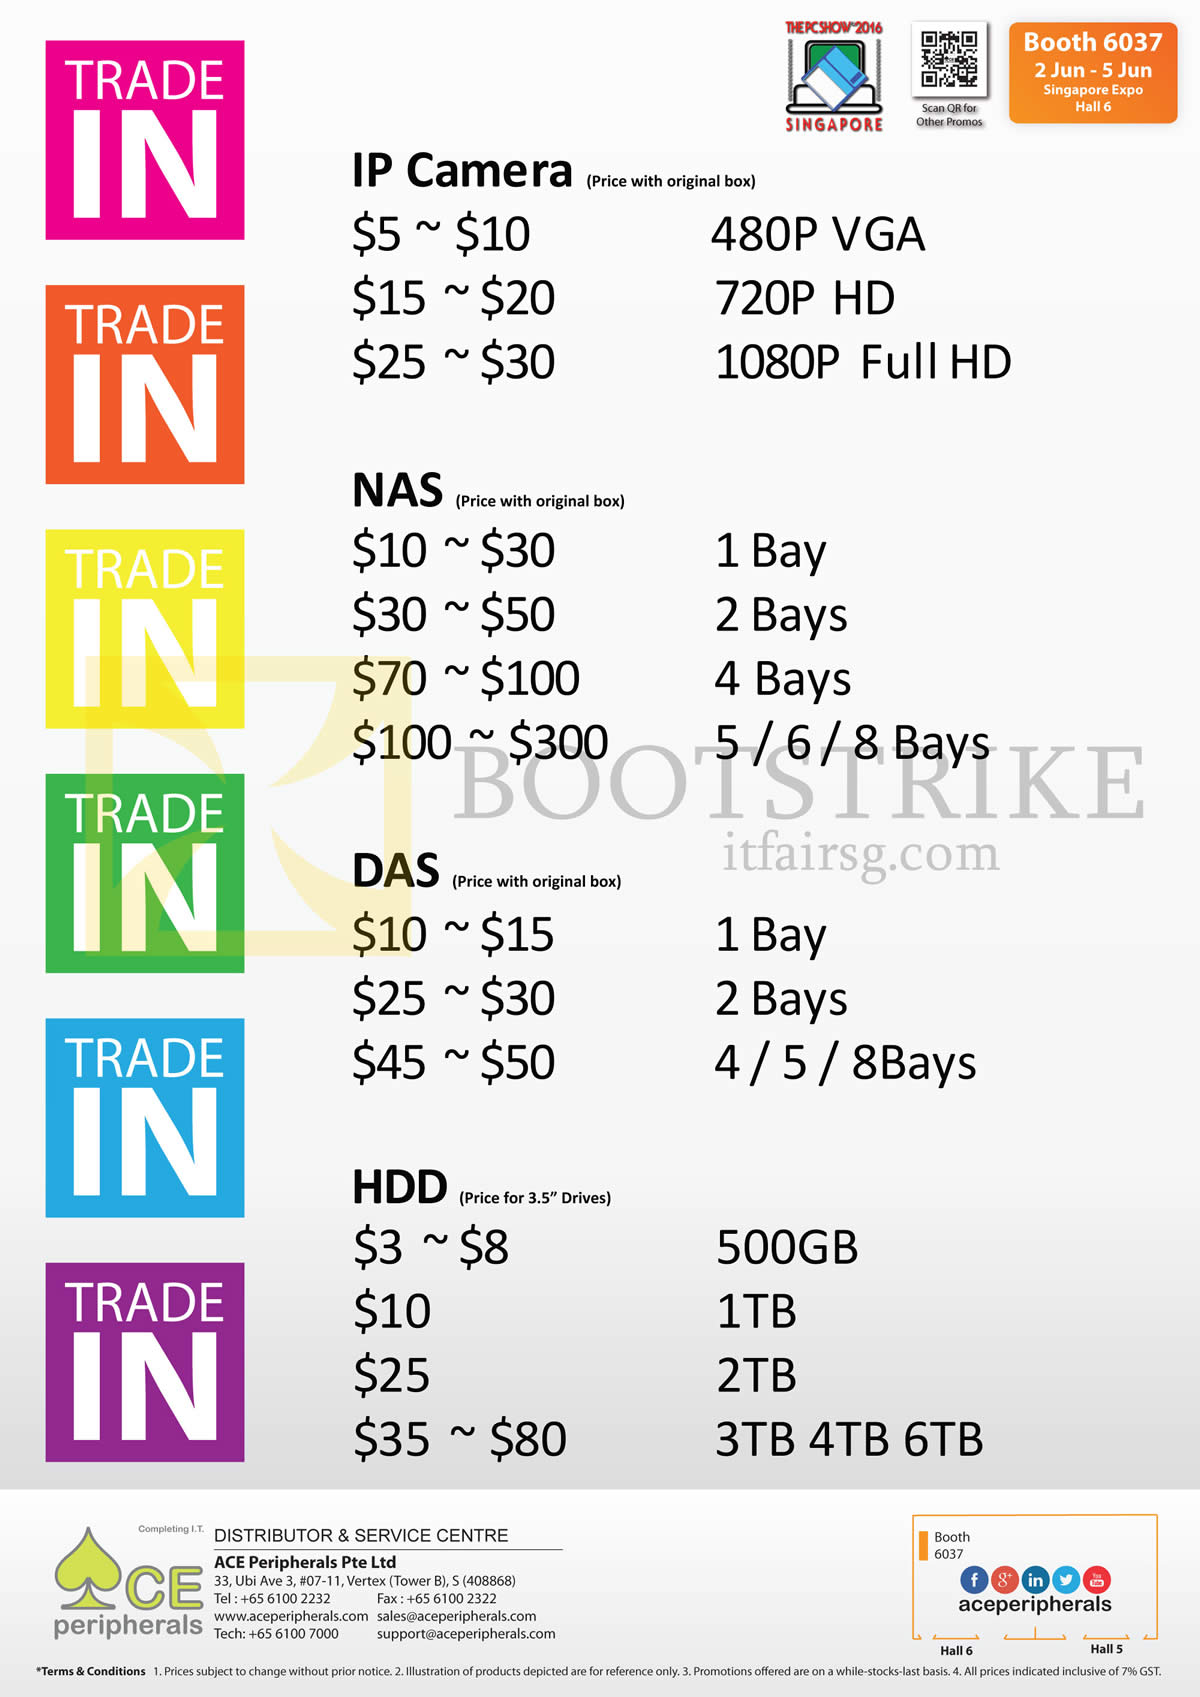 PC SHOW 2016 price list image brochure of Ace Peripherals Trade In IP Camera, NAS, DAS, HDD